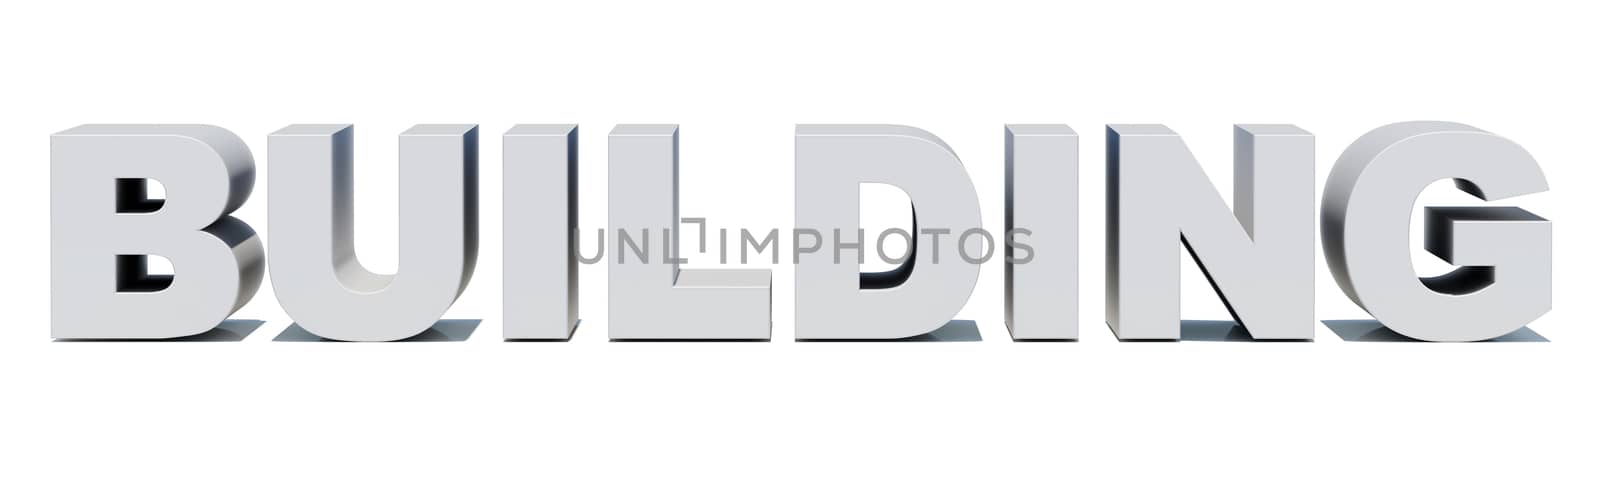 Word building on isolated white background, front view